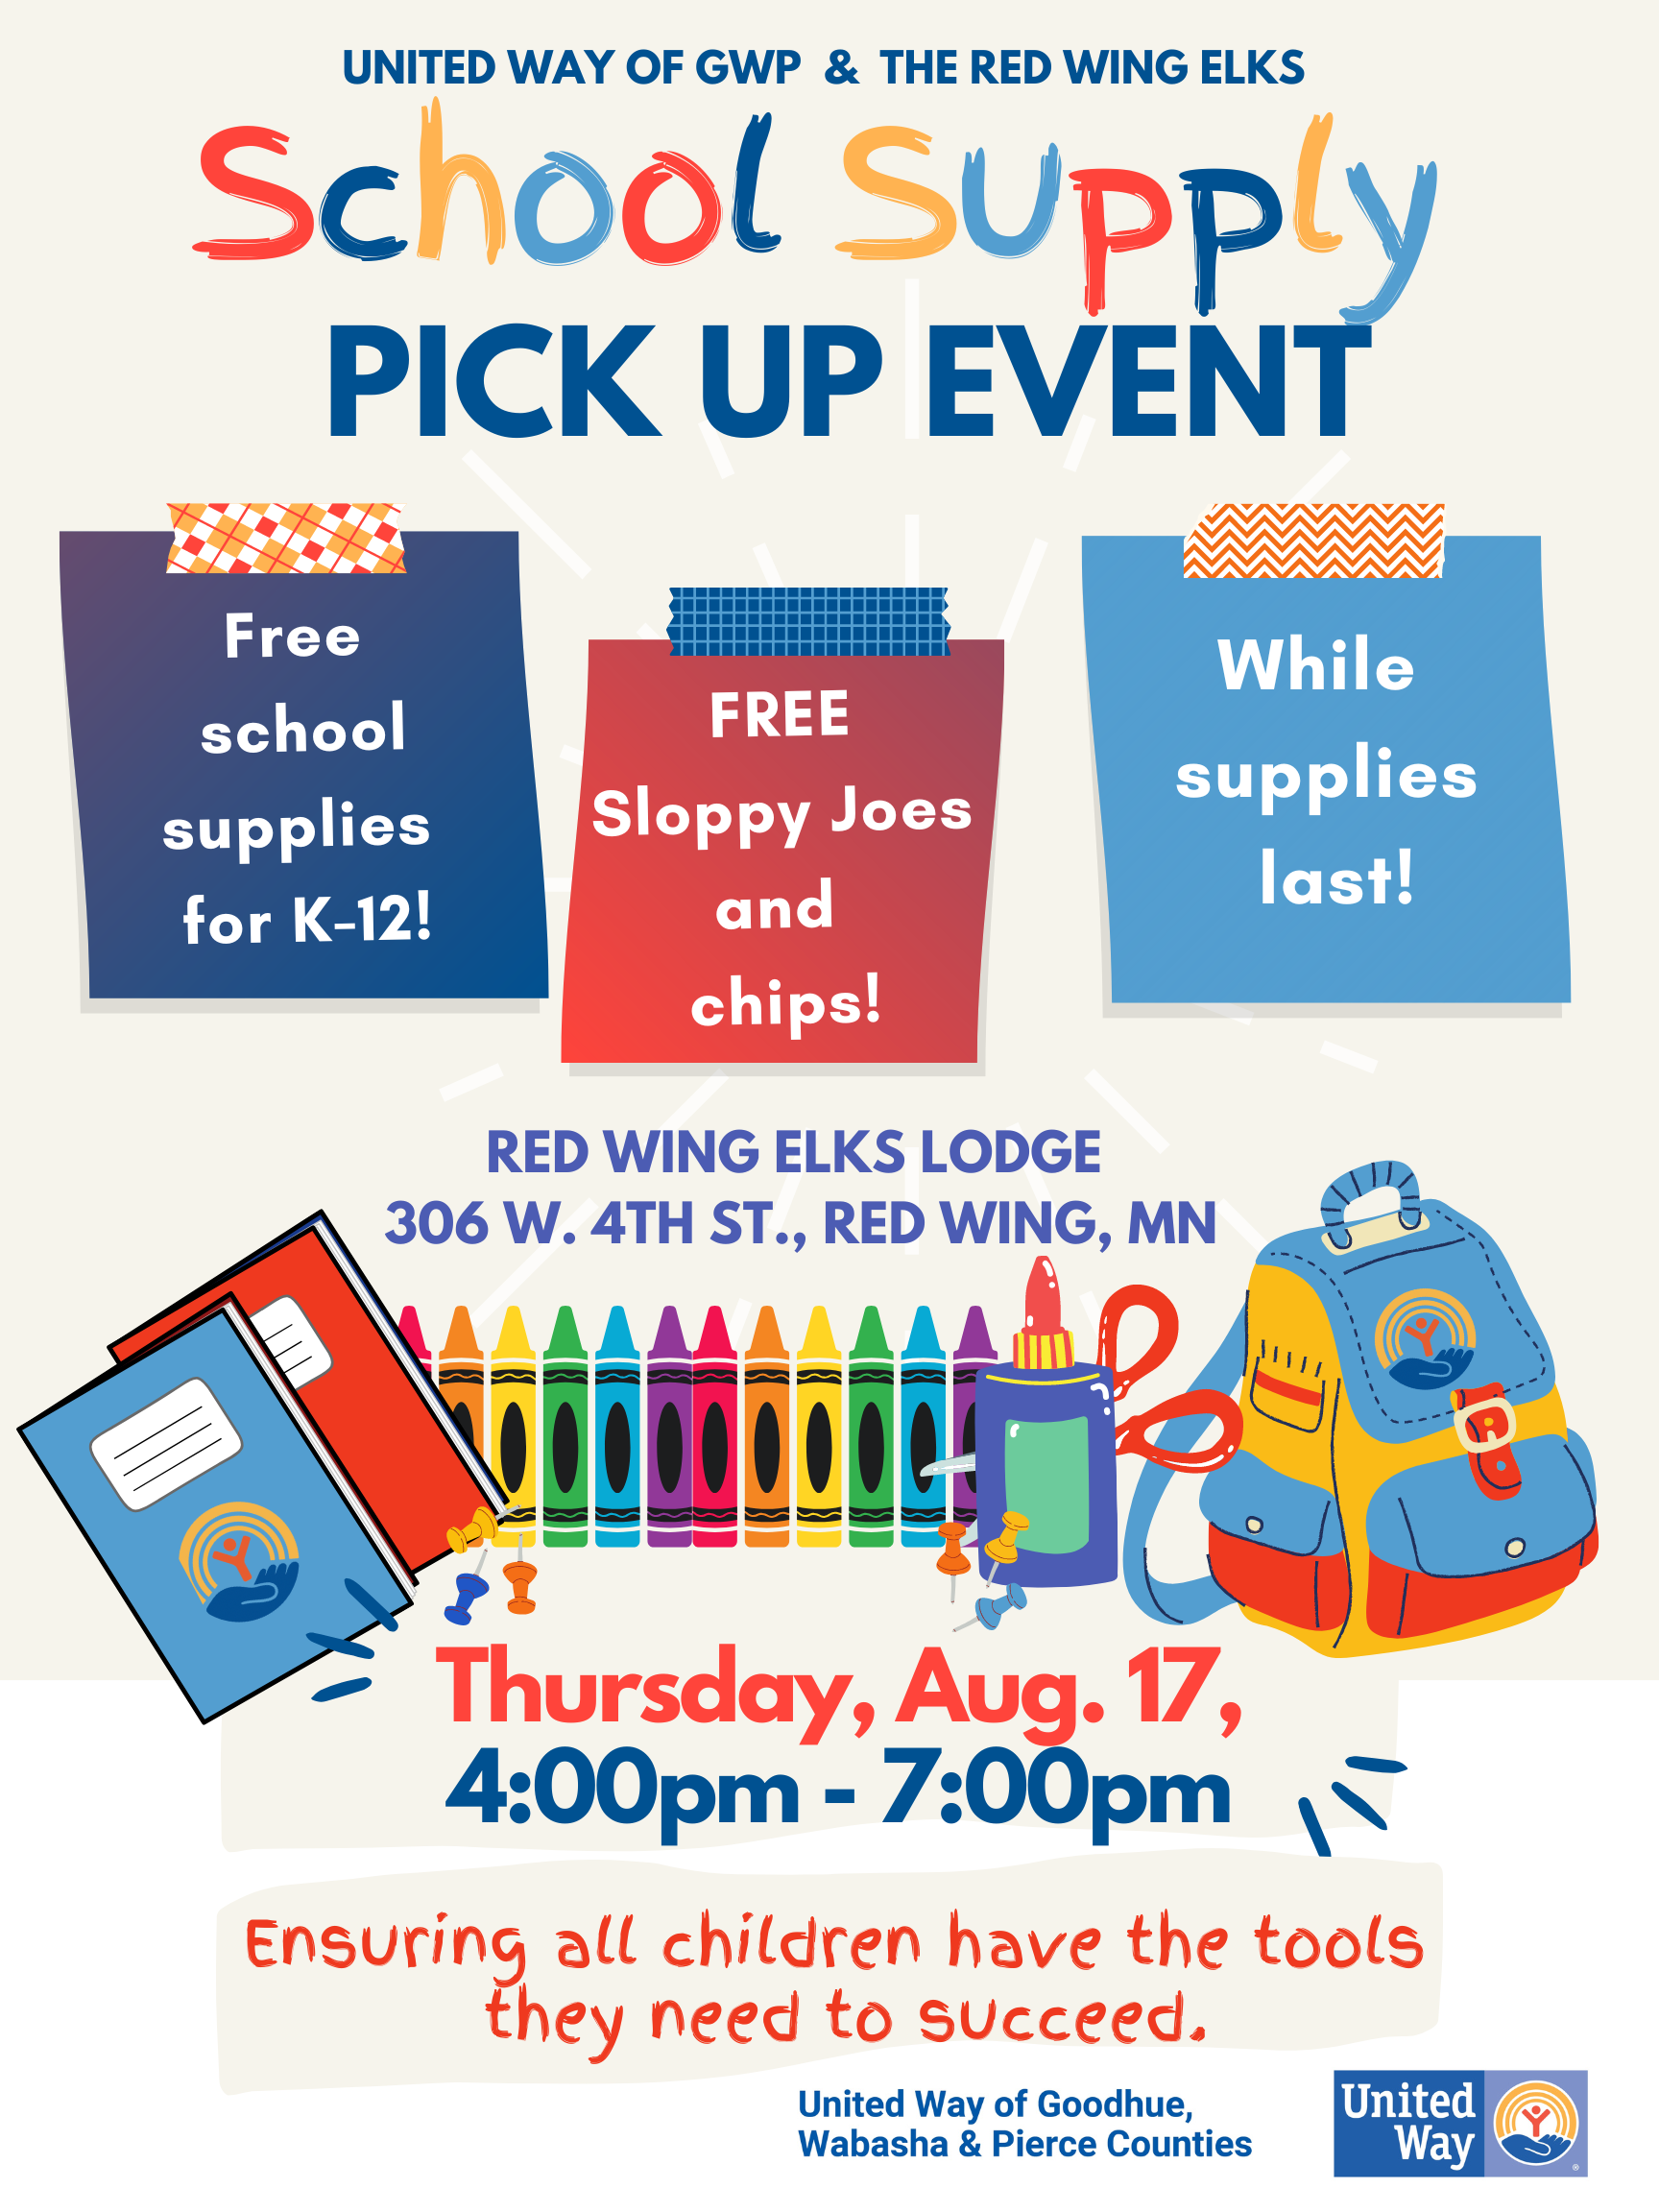 School Supply Drive Pick Up Event